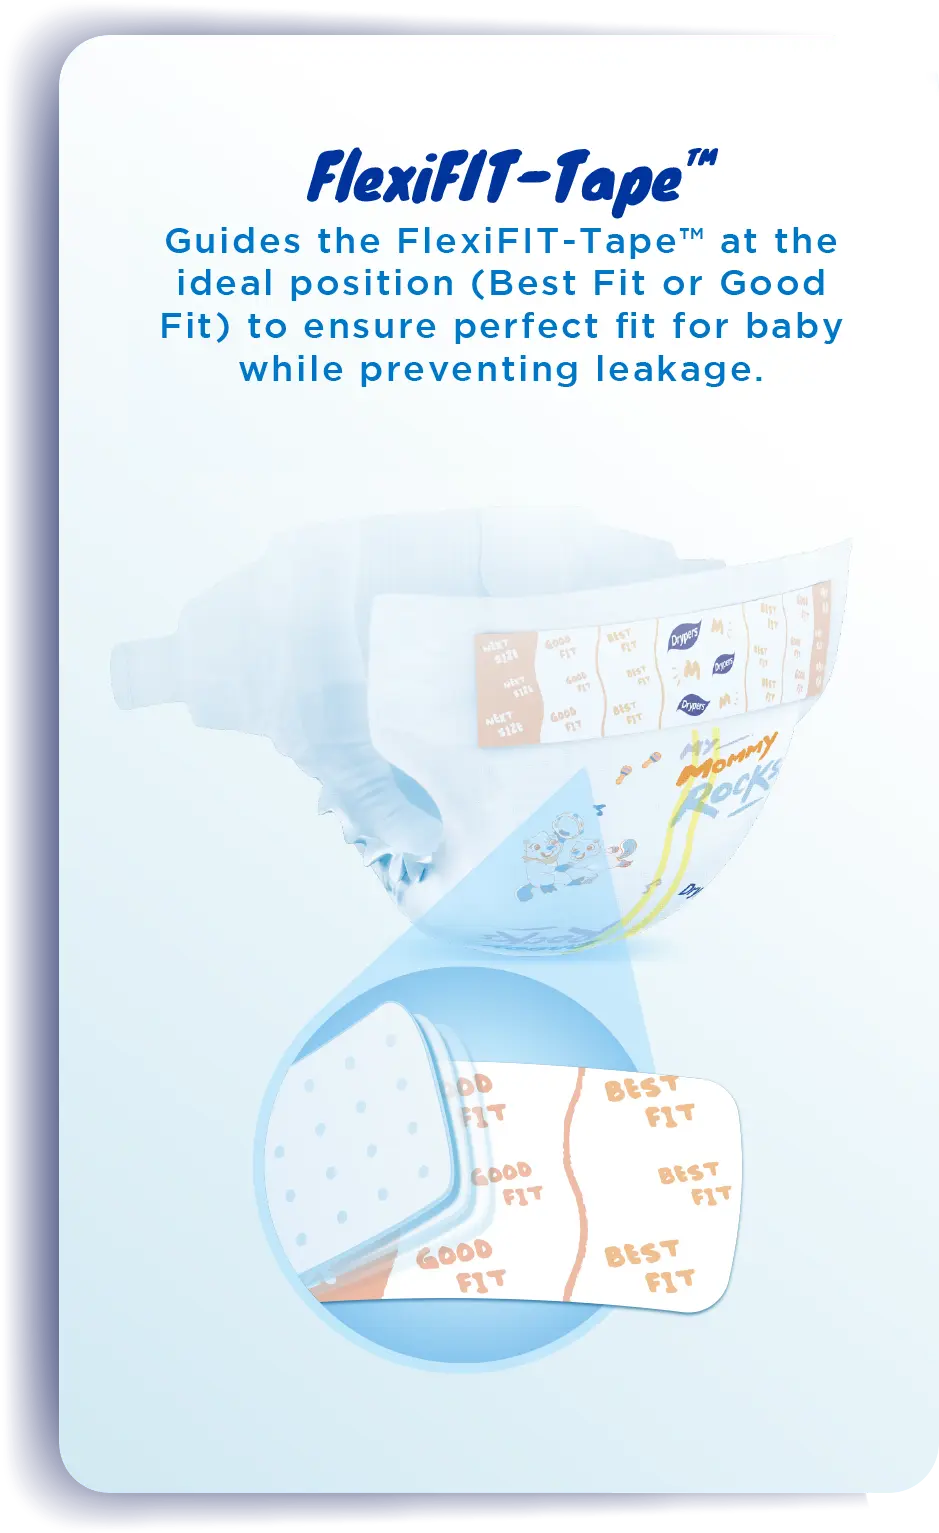 FlexiFIT-Tape™: Guides the FlexiFIT-Tape™ at the ideal position (Best Fit or Good Fit) to ensure perfect fit for baby while preventing leakage.